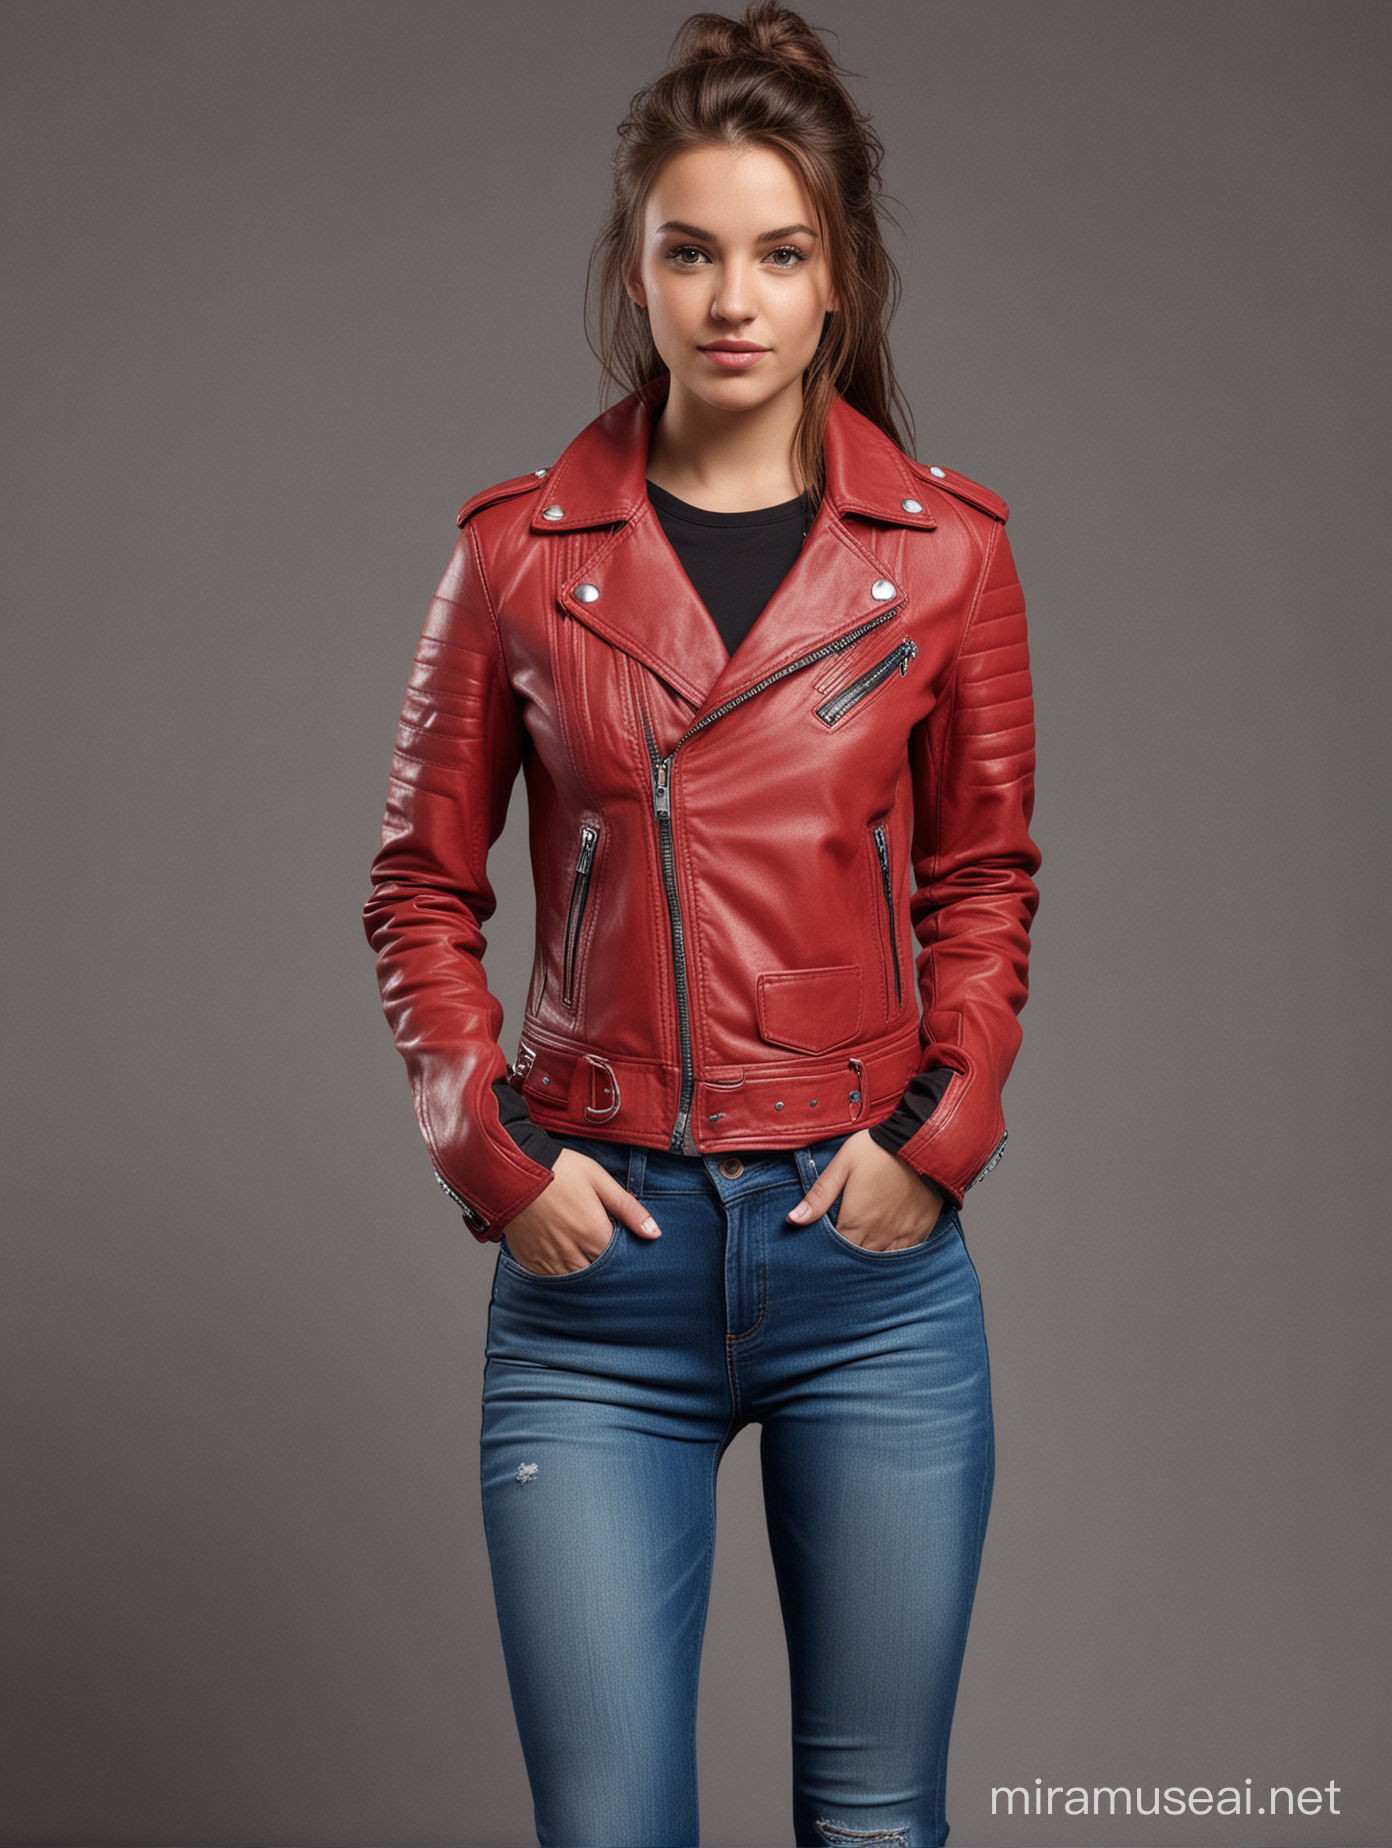 23 yo american woman, brown hair,red leather jacket,black scoop neck t-shirt,blue fitted jeans,biker gloves